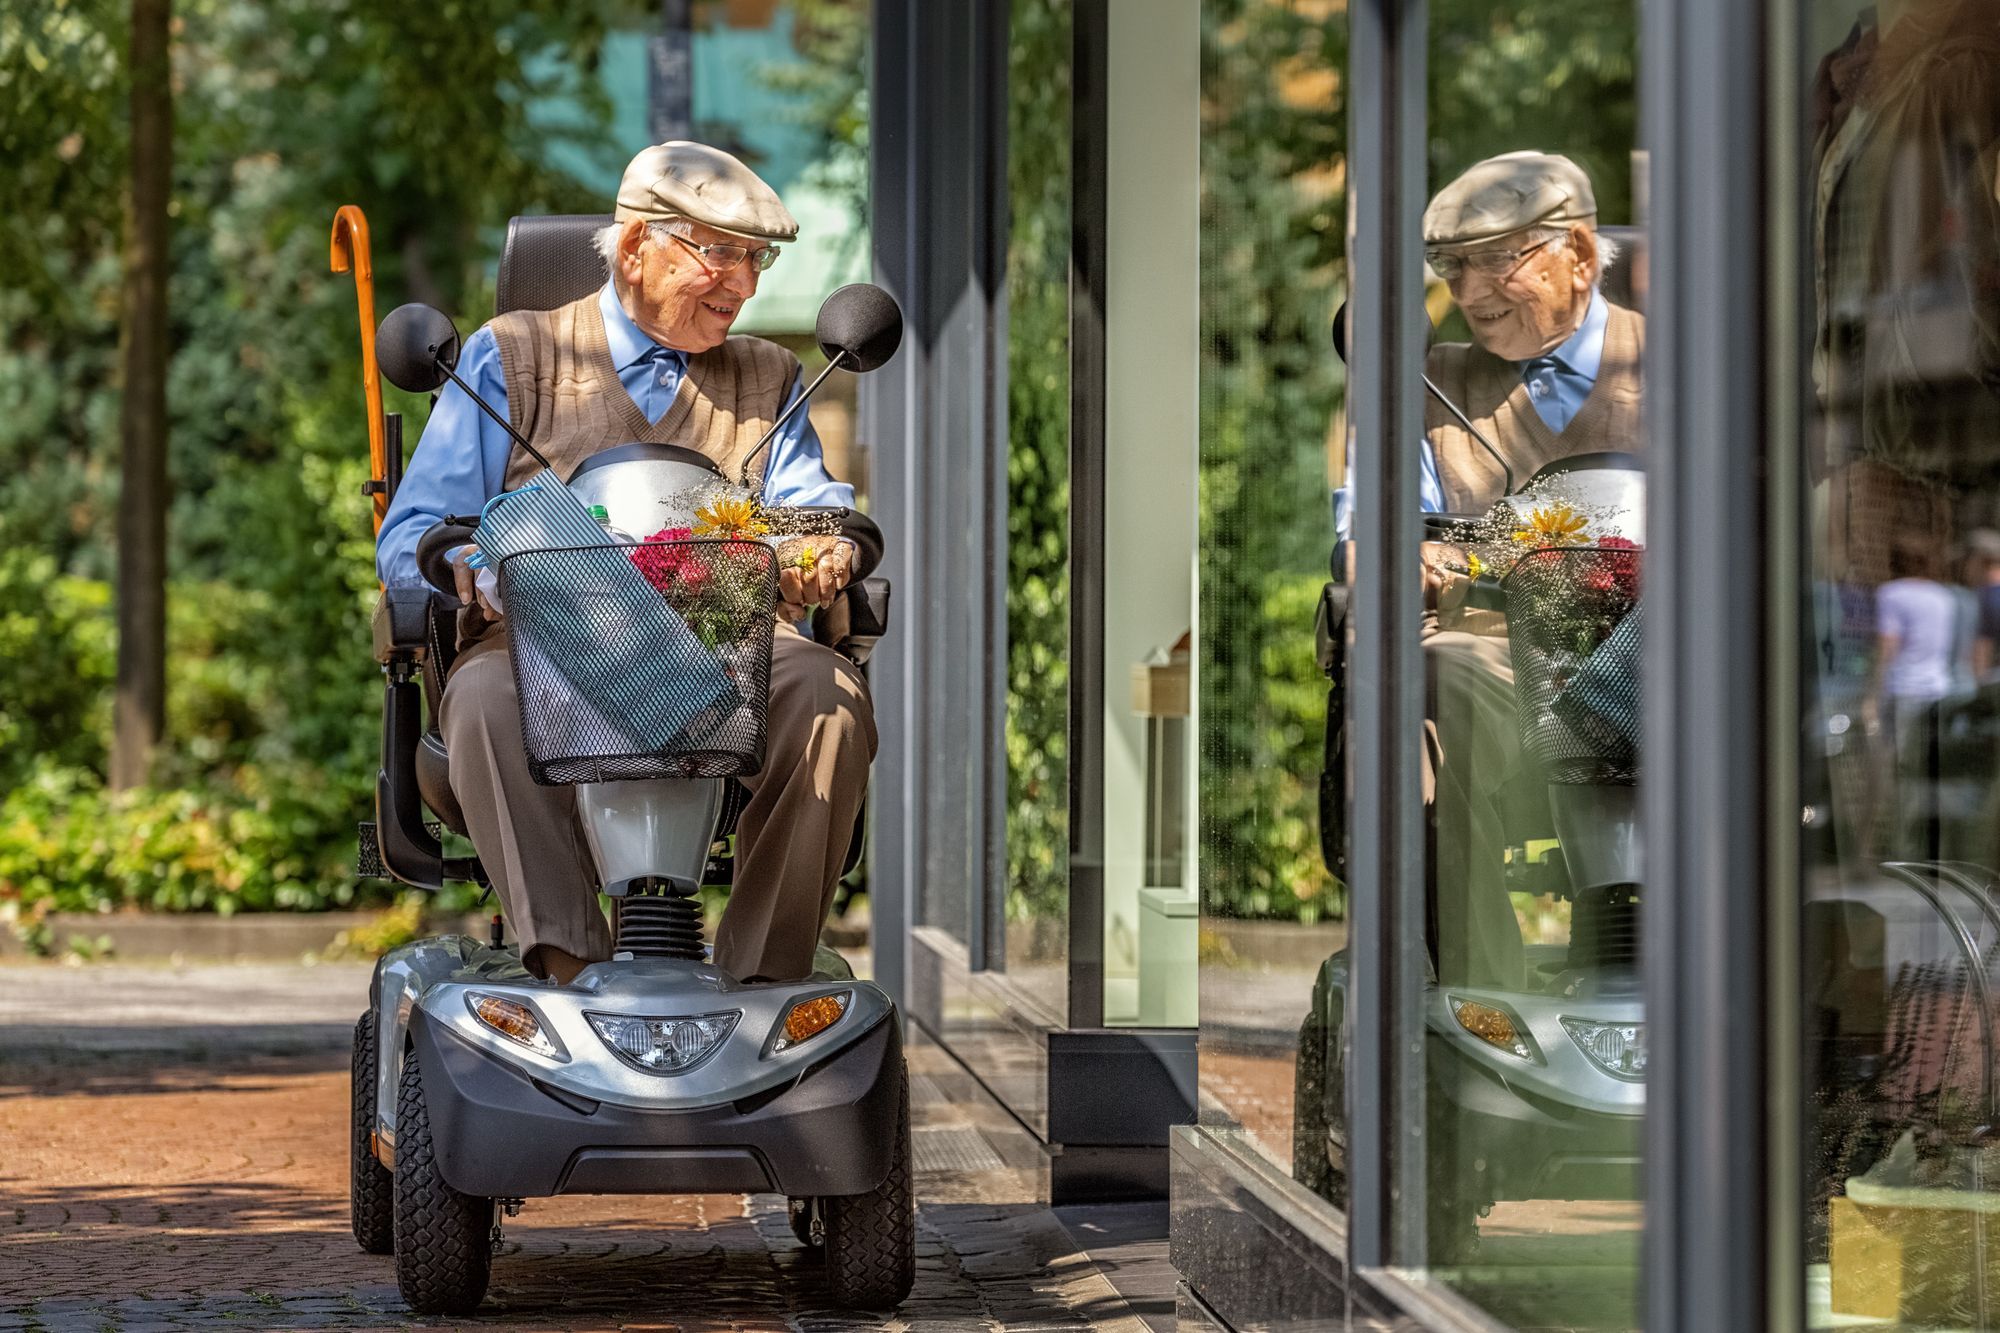 Factors to Consider When Buying a Mobility Scooter